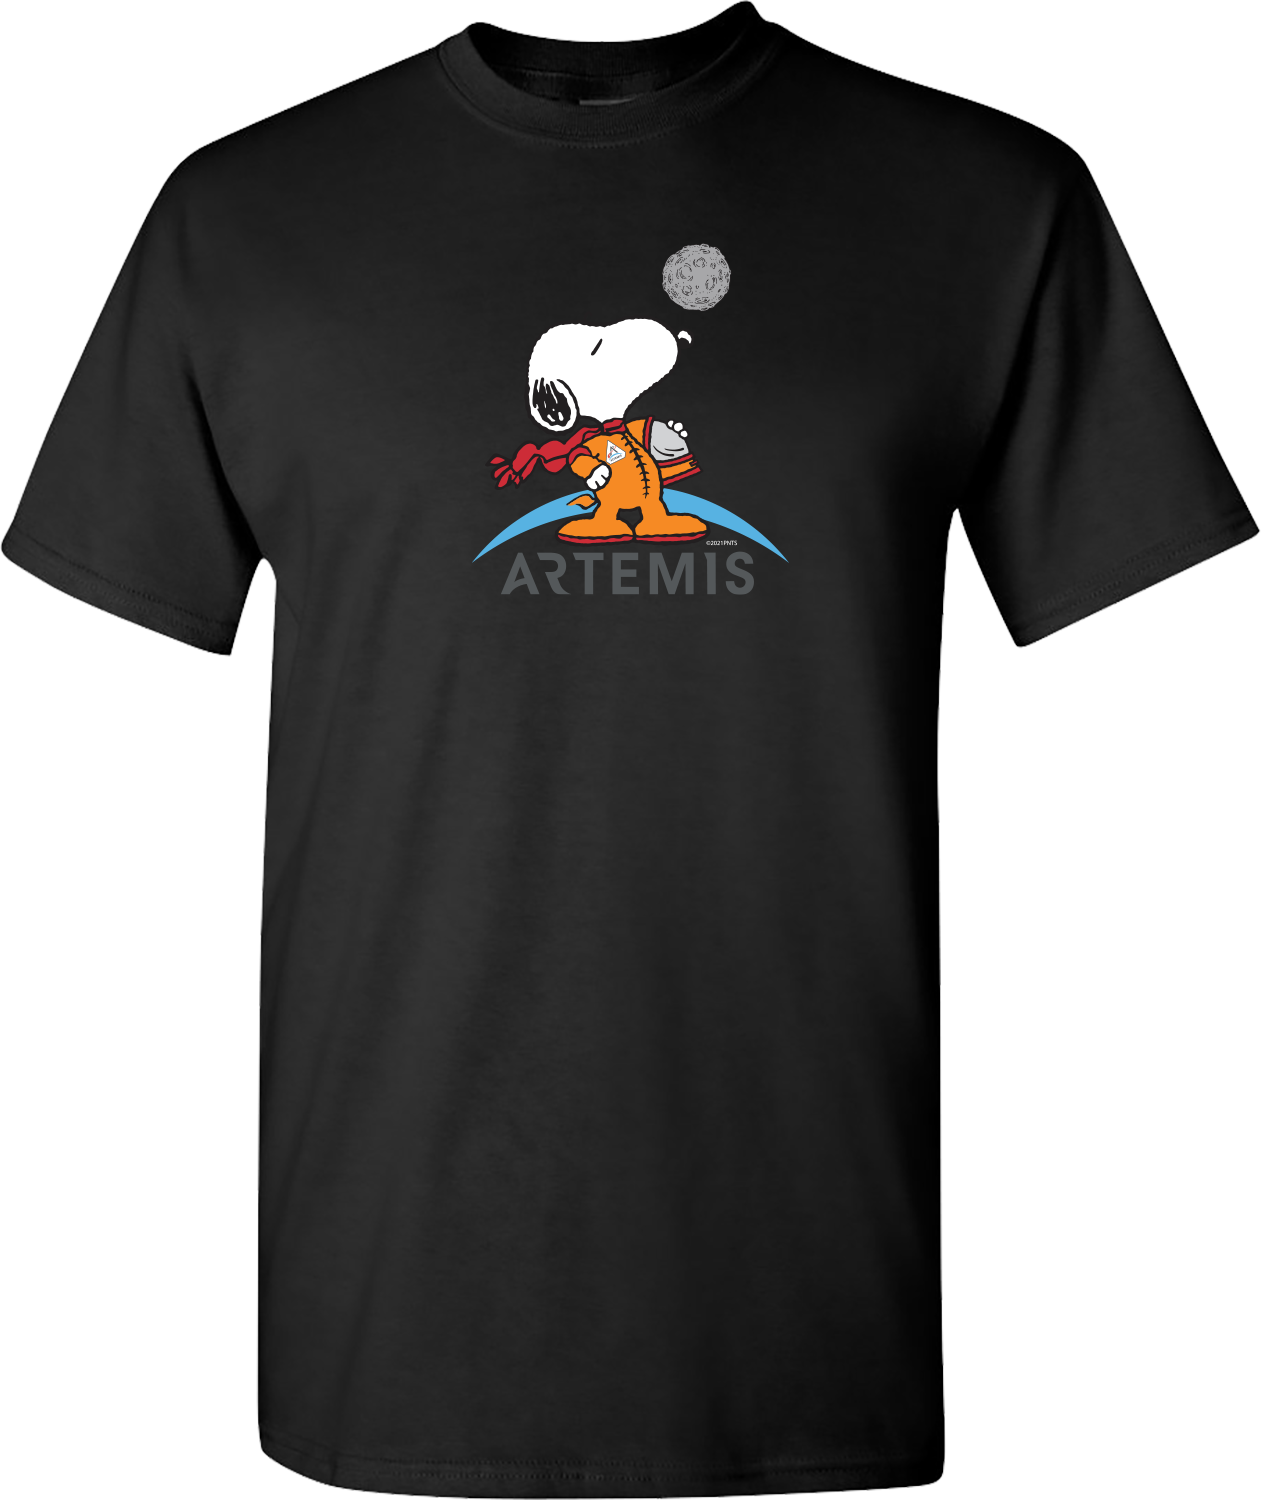 Snoopy Artemis Shirt in adult unisex - The Space Store